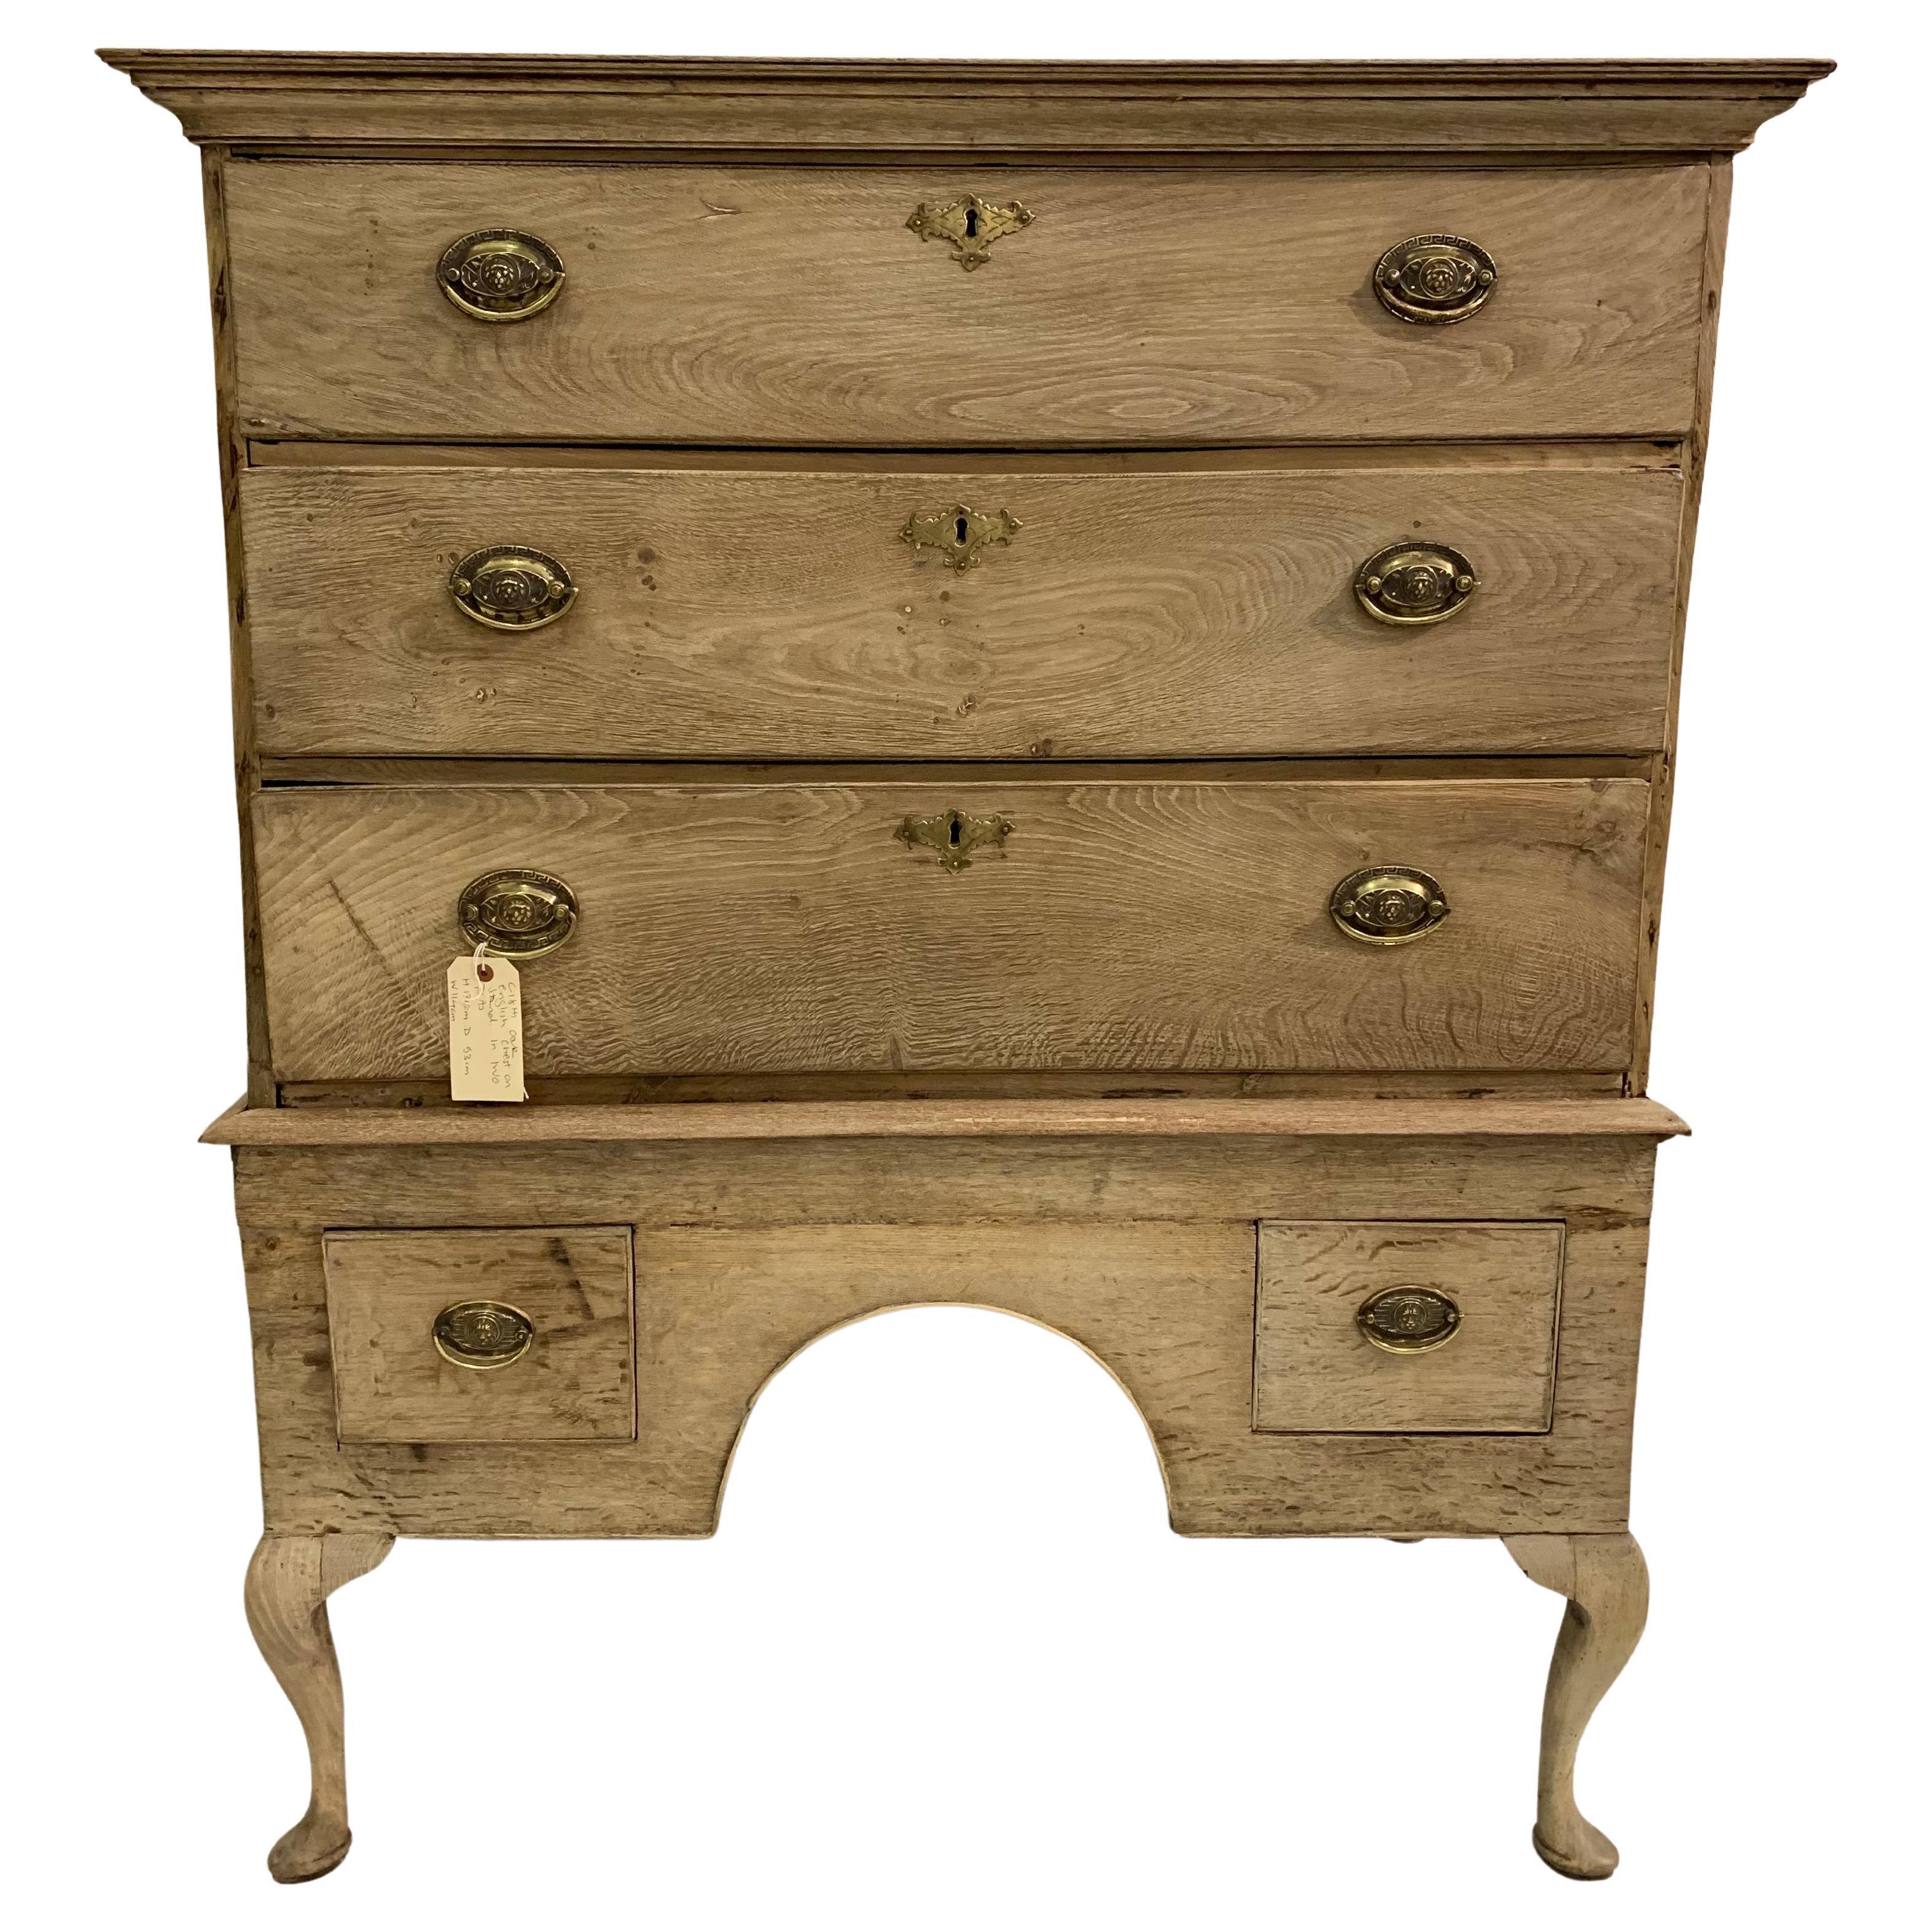 18th Century English Five Drawer Oak Country Chest Sitting on a Stand